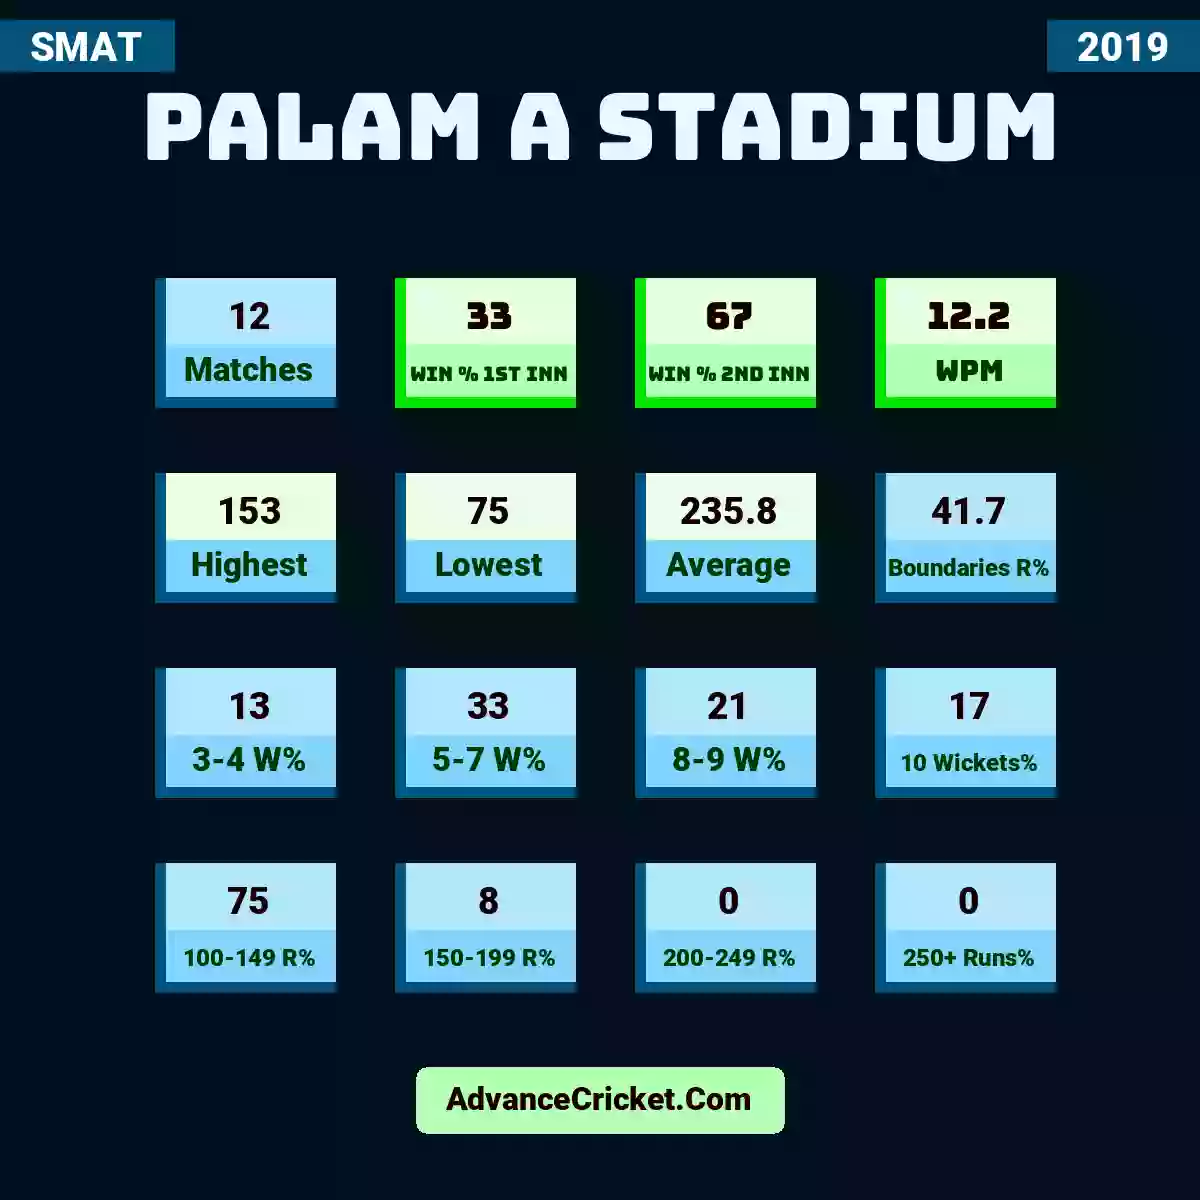 Image showing Palam A Stadium with Matches: 12, Win % 1st Inn: 33, Win % 2nd Inn: 67, WPM: 12.2, Highest: 153, Lowest: 75, Average: 235.8, Boundaries R%: 41.7, 3-4 W%: 13, 5-7 W%: 33, 8-9 W%: 21, 10 Wickets%: 17, 100-149 R%: 75, 150-199 R%: 8, 200-249 R%: 0, 250+ Runs%: 0.